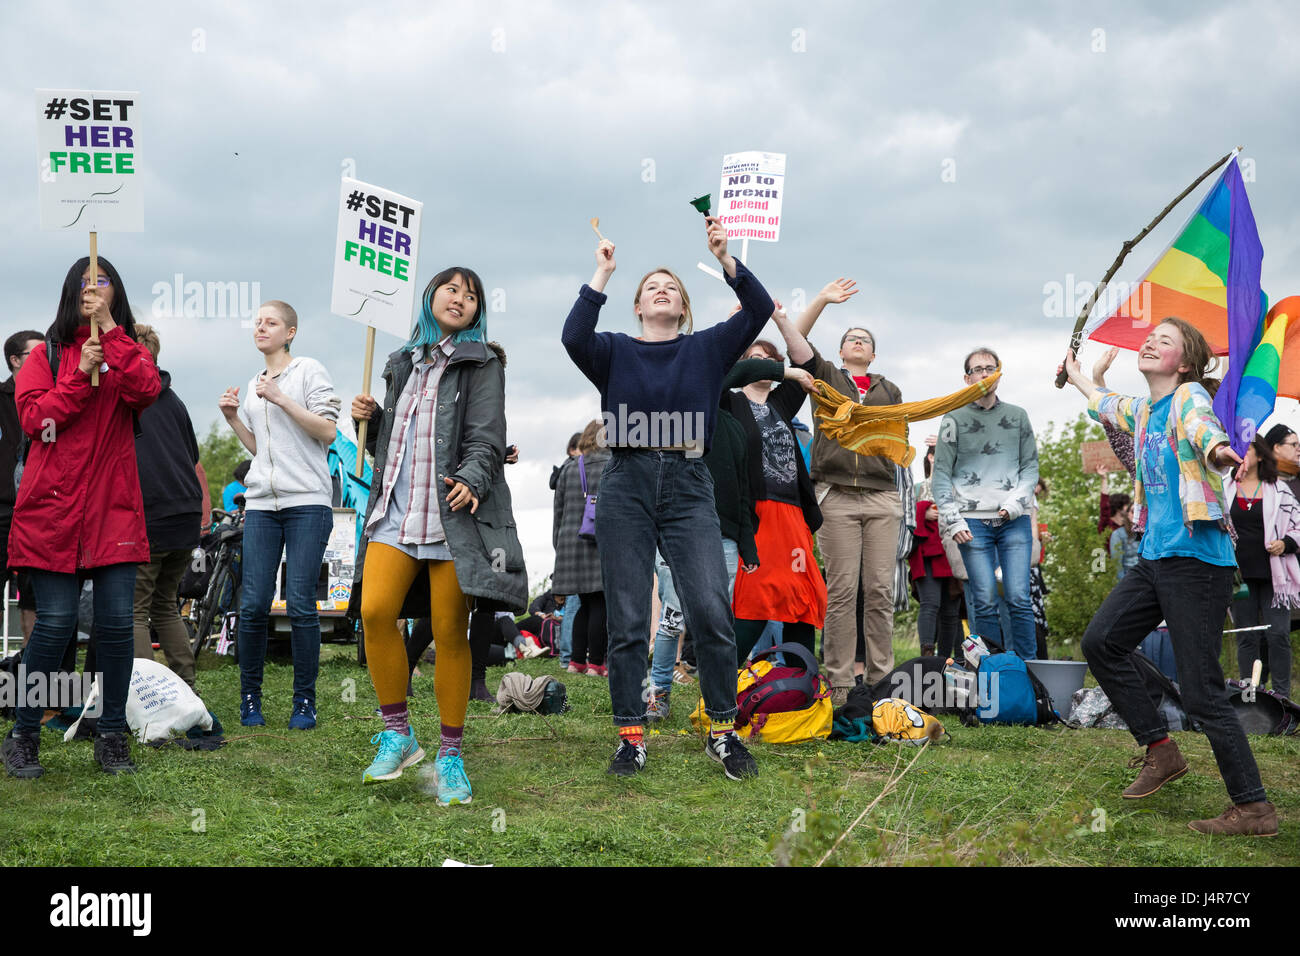 Milton Ernest, UK. 13th May, 2017. Campaigners against immigration detention communicate with detainees inside Yarl's Wood Immigration Removal Centre during a large protest organised by Movement For Justice By Any Means Necessary. Campaigners, including former detainees, called for all immigration detention centres to be closed. Credit: Mark Kerrison/Alamy Live News Stock Photo